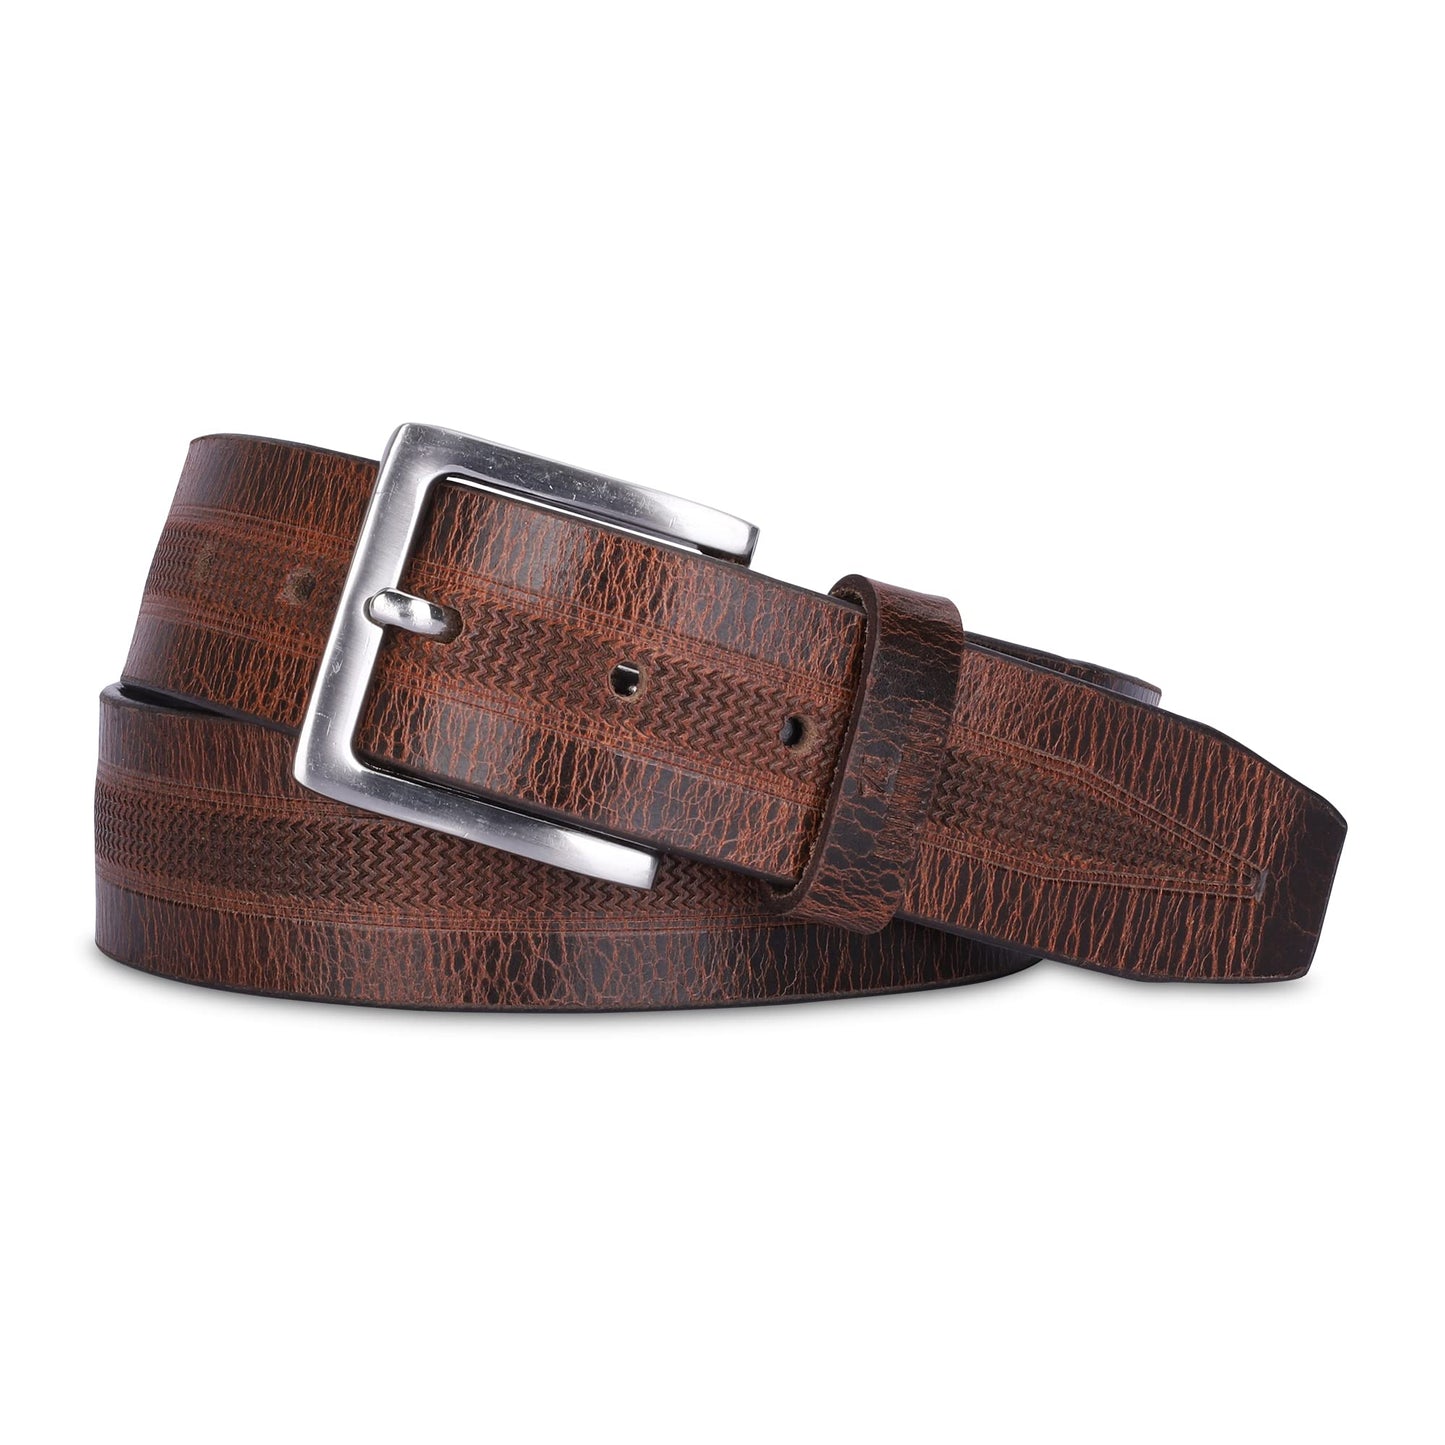 THE CLOWNFISH Men's Genuine Leather Belt with Embossed Design- Tan (Size-36 inches)